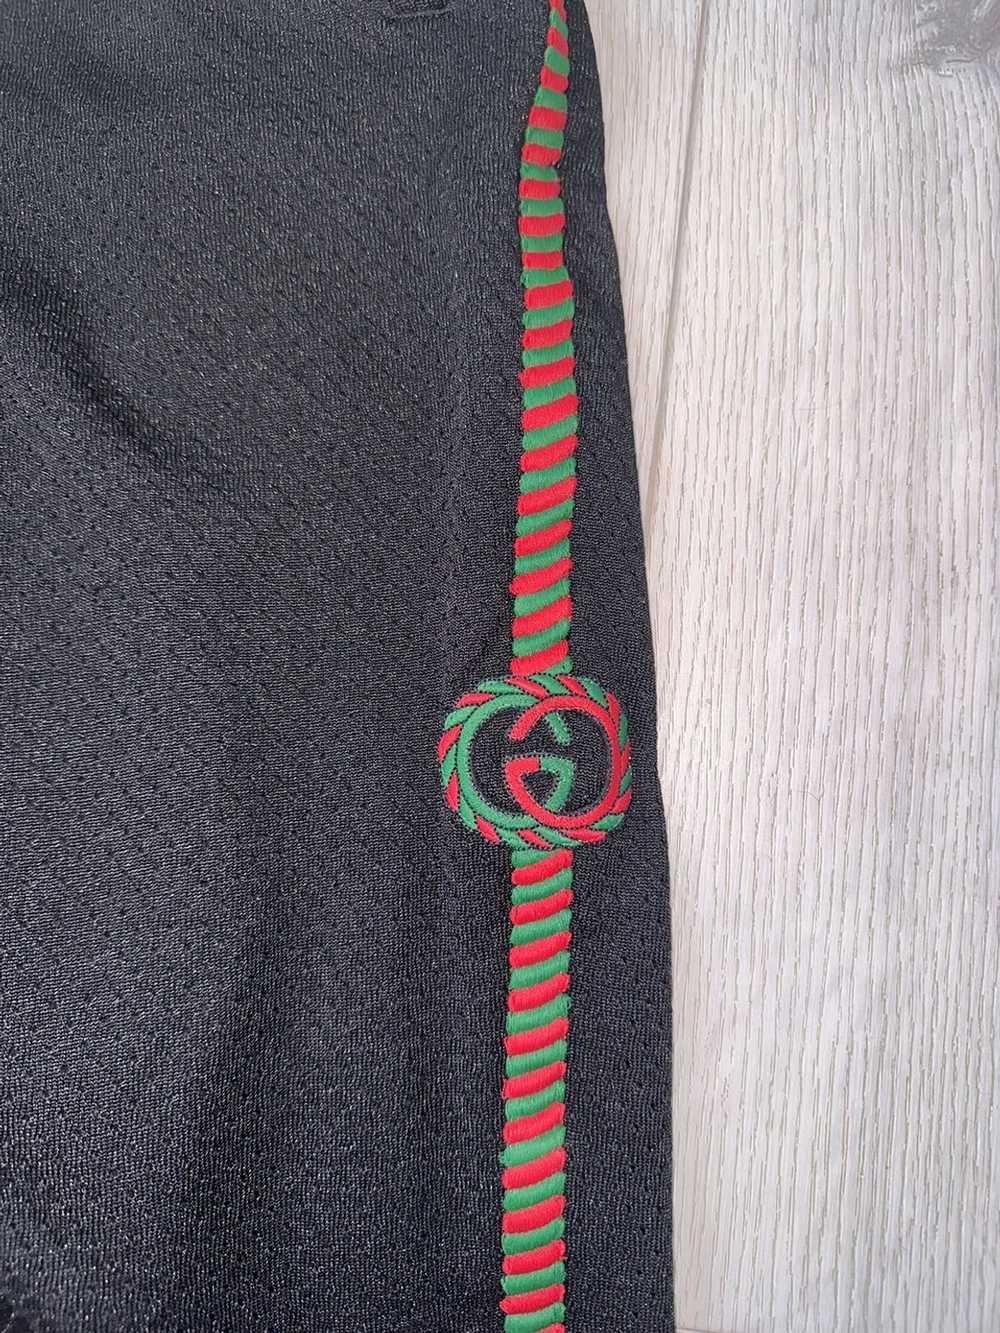 GU Gucci track pants with side stripe - image 2